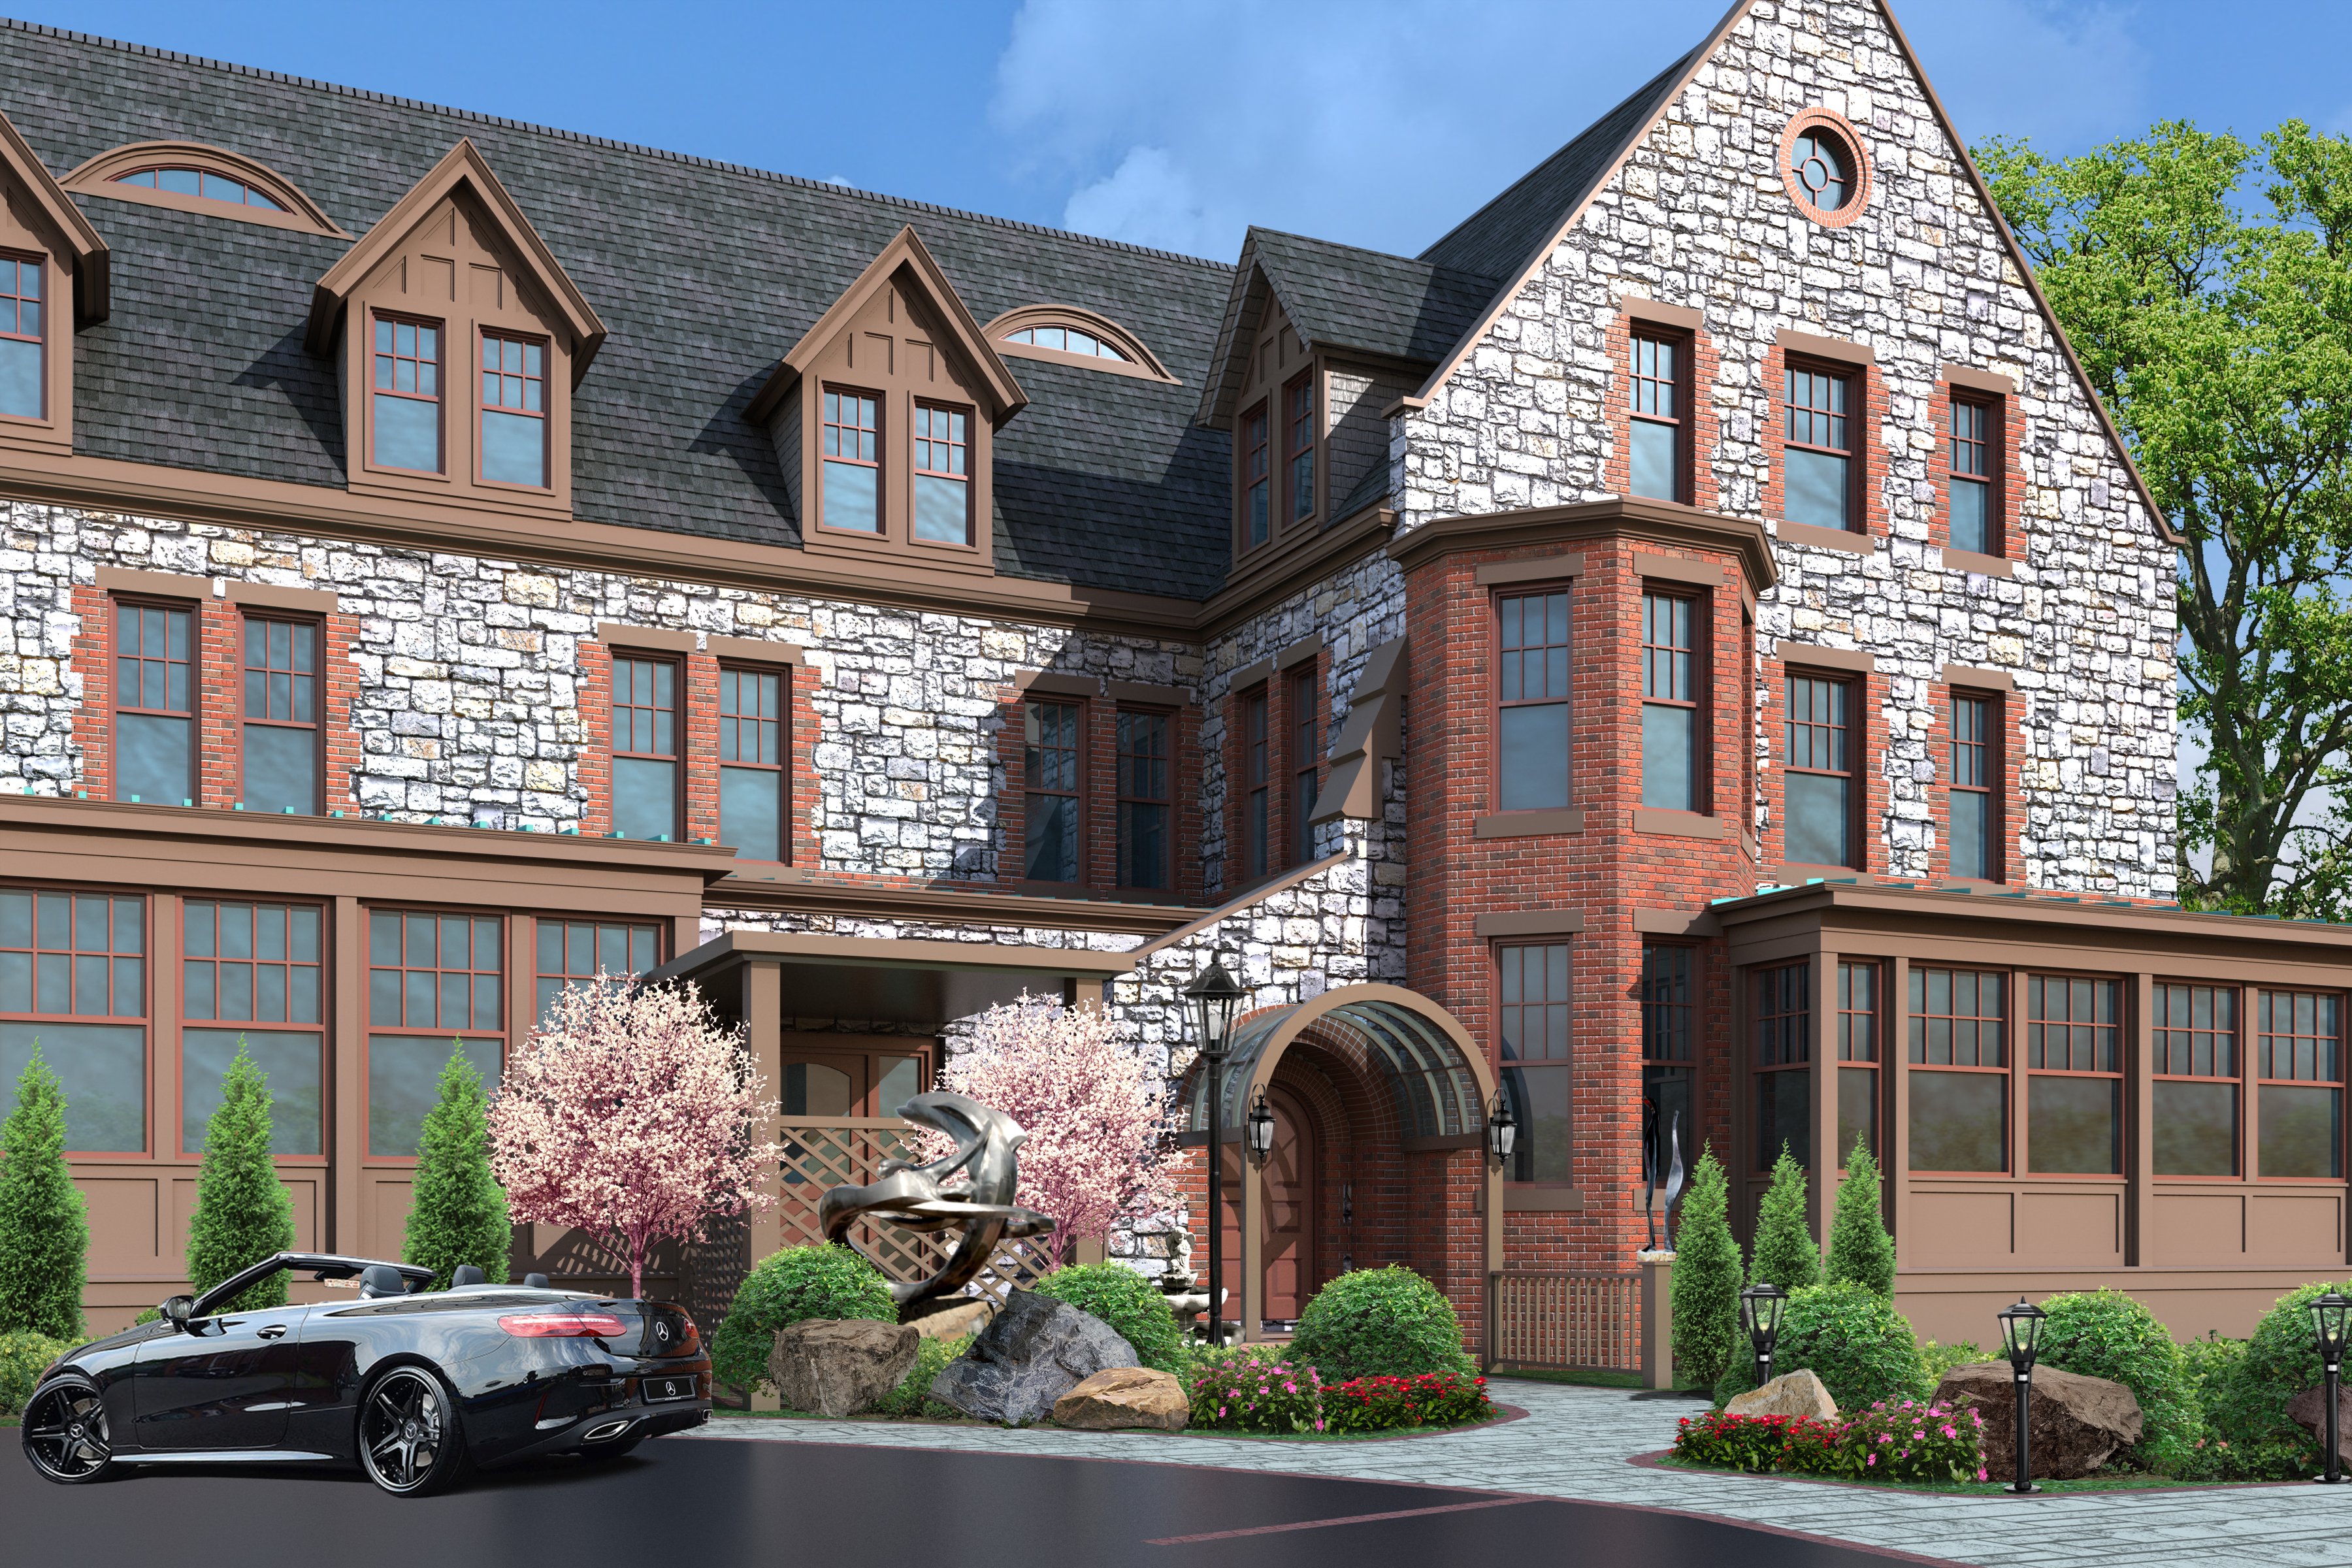 The Abbey Inn  Spa is slated to open next year  Photo courtesy of The Abbey Inn  Spa